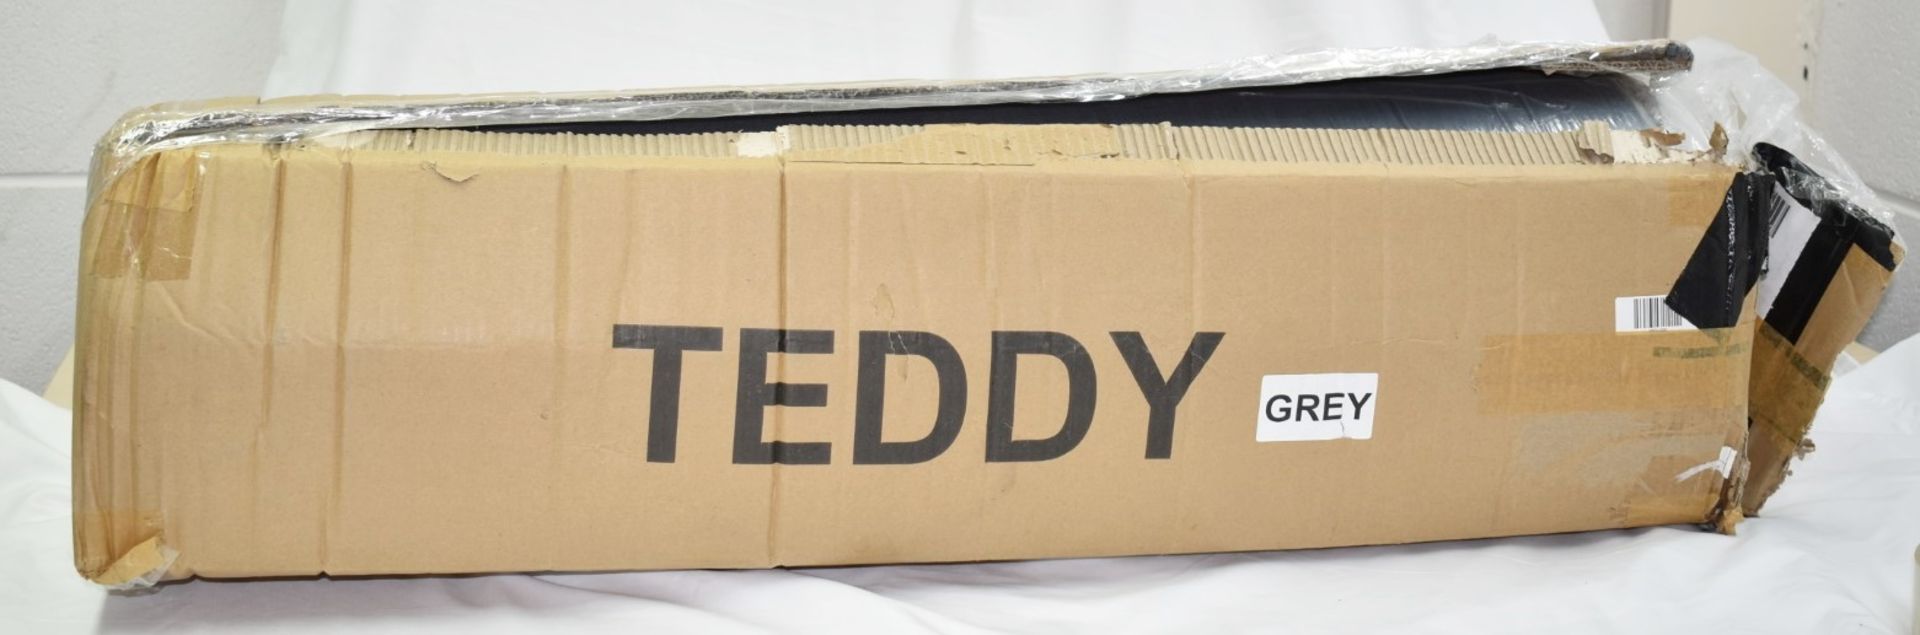 1 x TEDDY LONDON Large Luxury Bouclé Dog Bed In Grey - Origal Price £199.00 - Sealed Boxed Stock - - Image 7 of 7